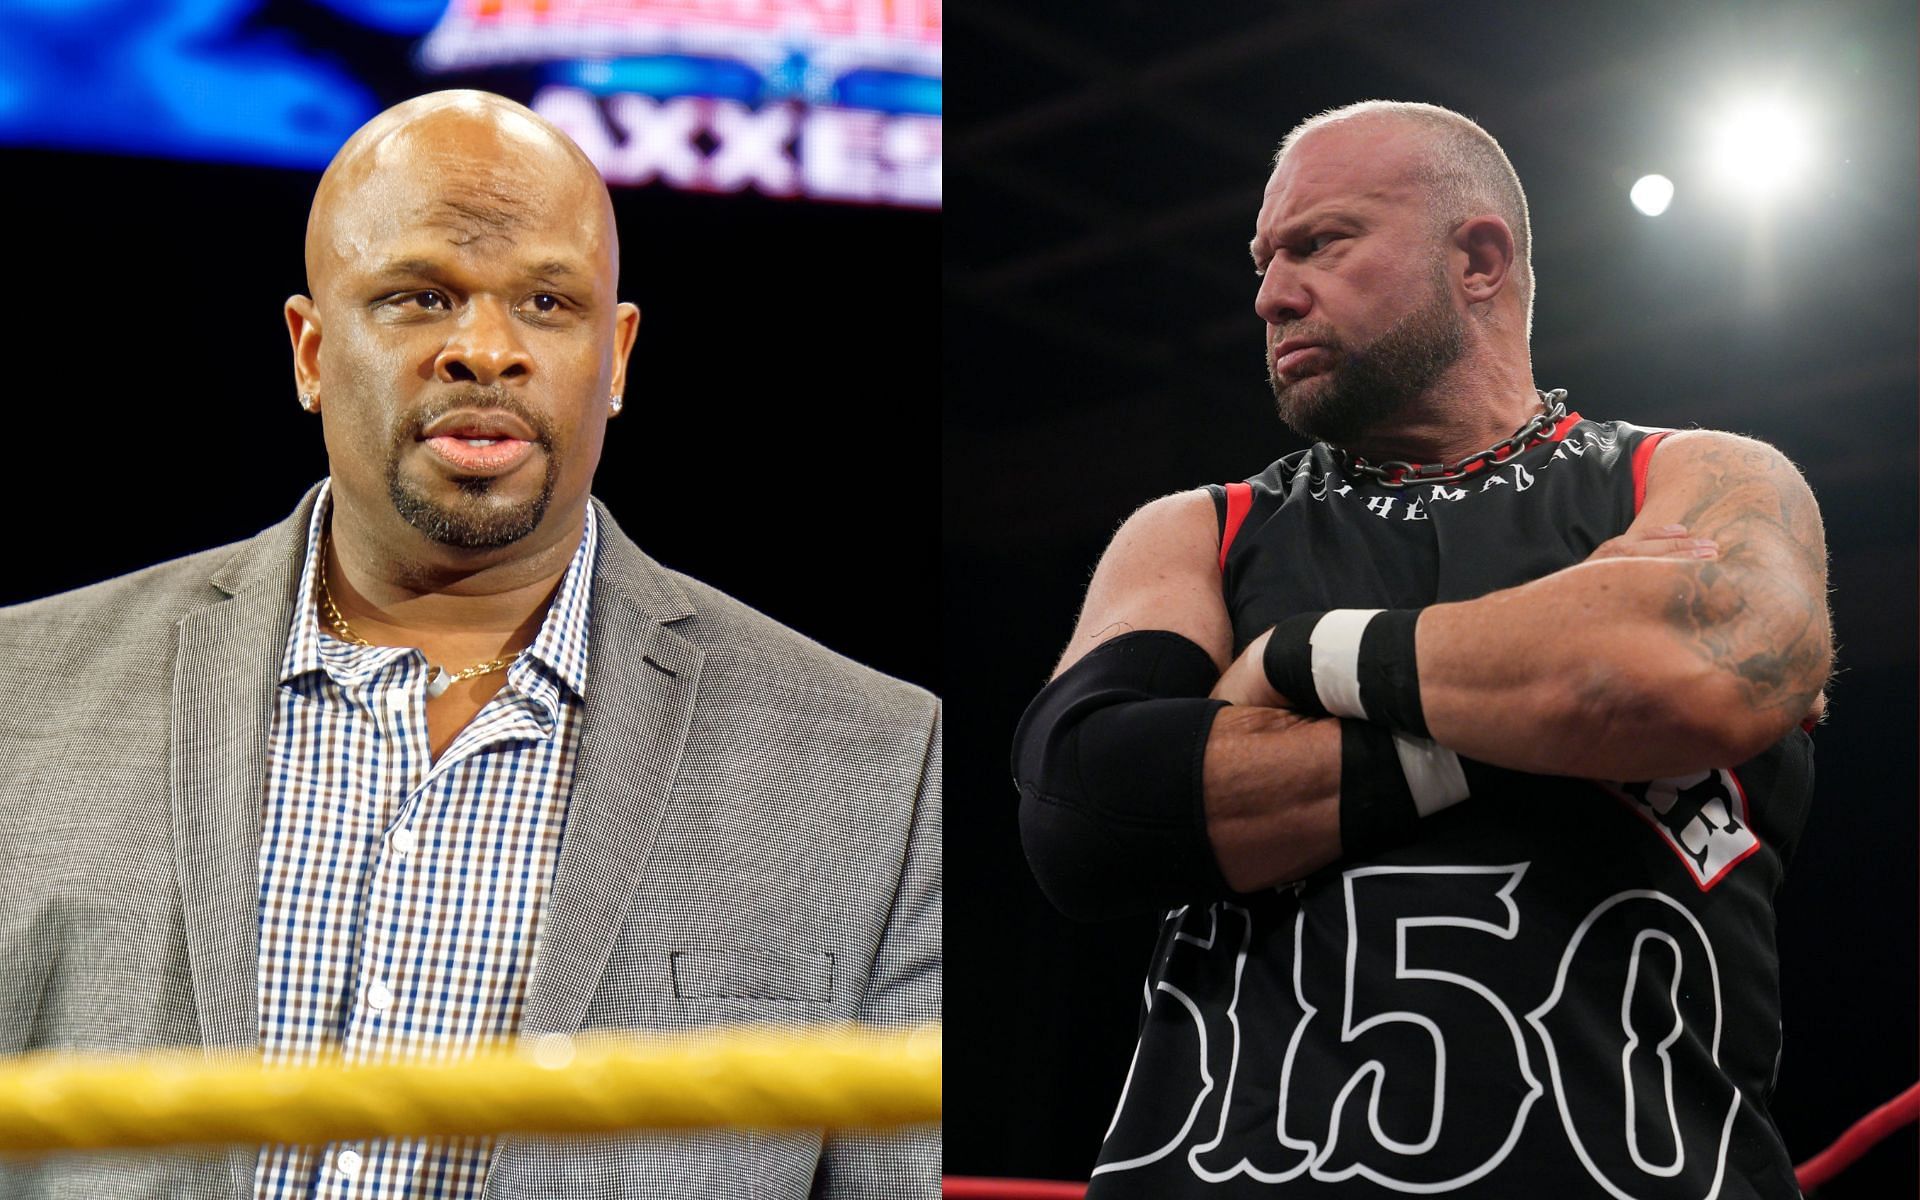 WWE legend Bubba Ray Dudley, aka Bully Ray, wanted to break The